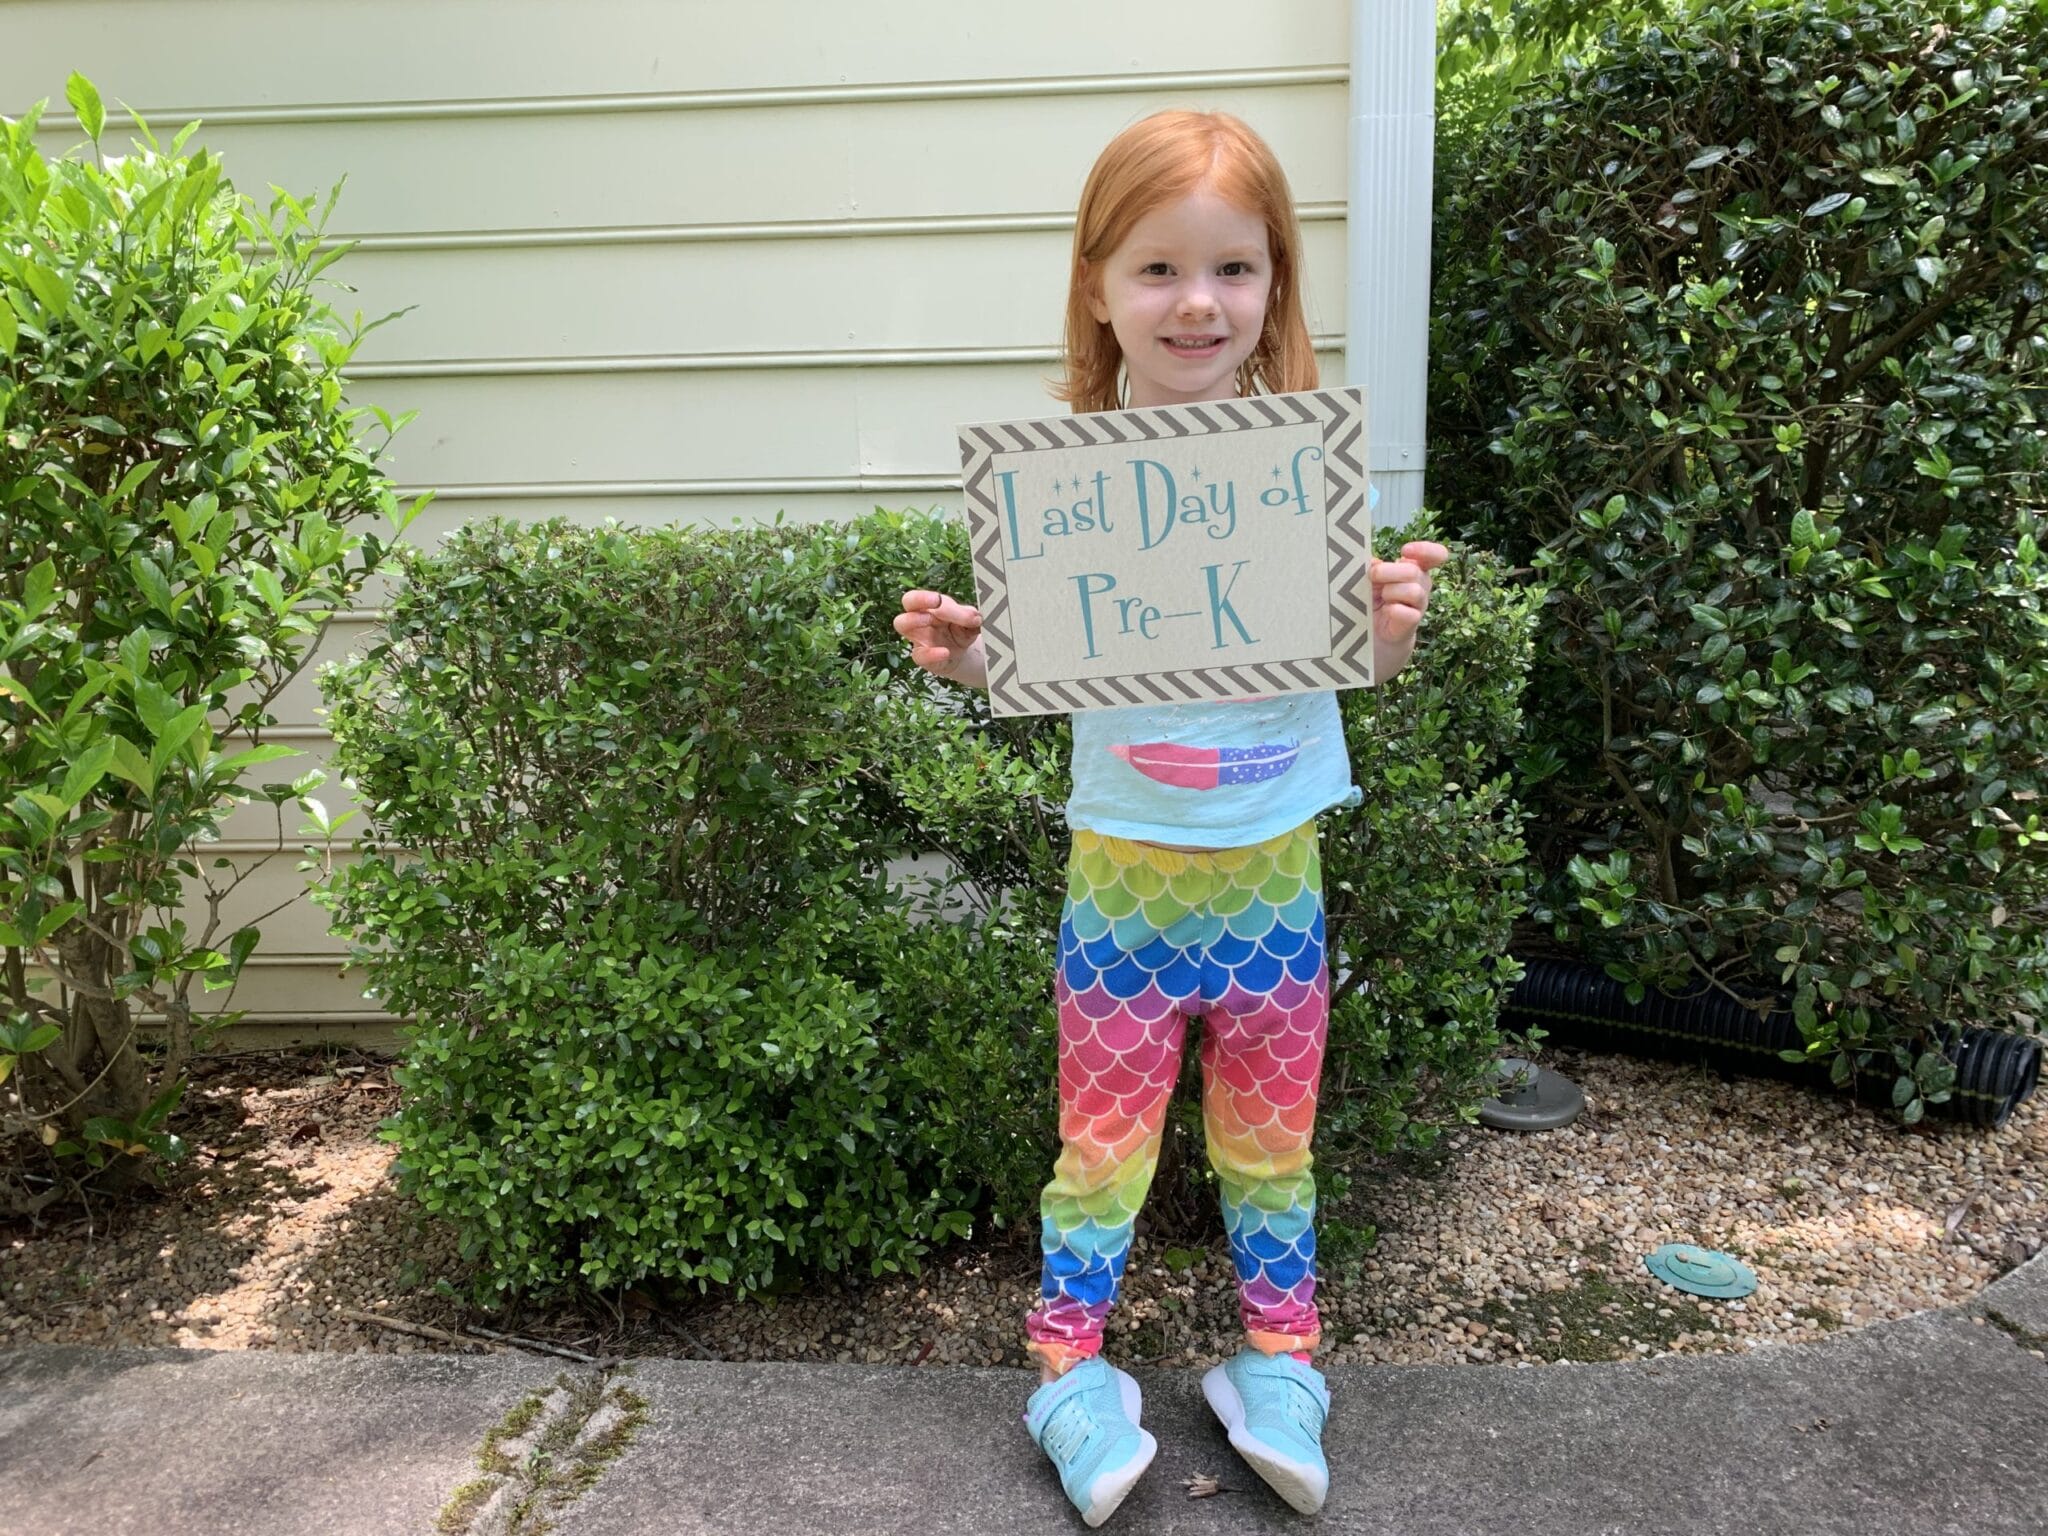 Last day of pre-k with sign